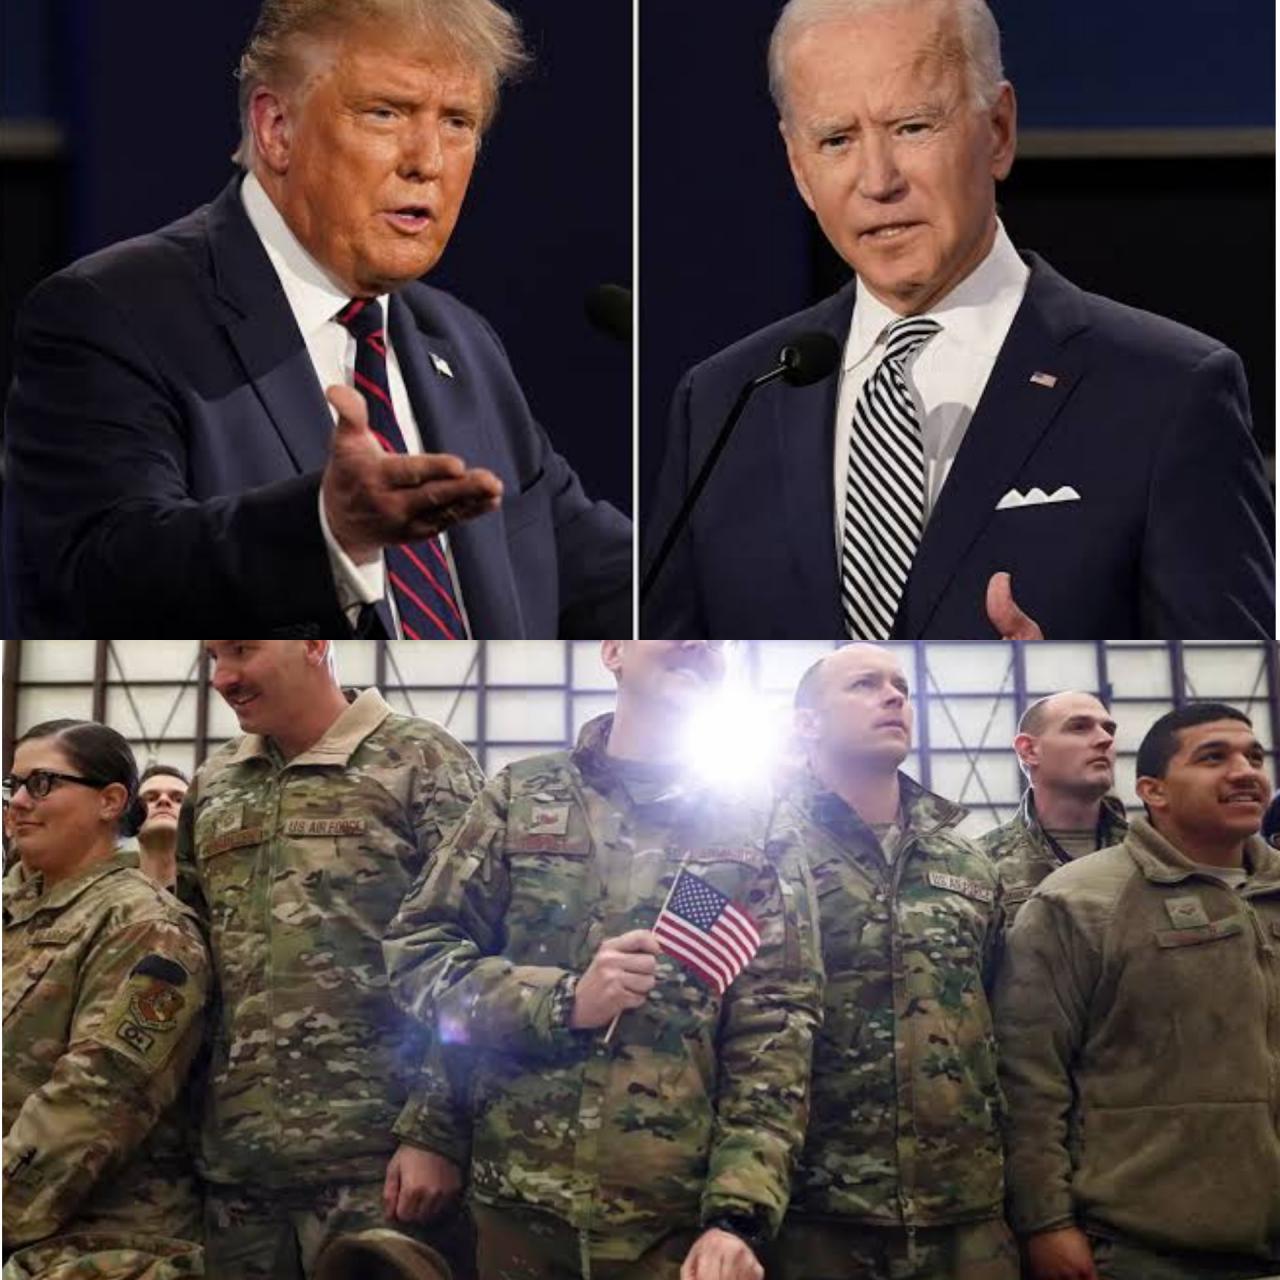 Trump gives reasons why Biden should pull US troops out of Afghanistan in May rather than September 11